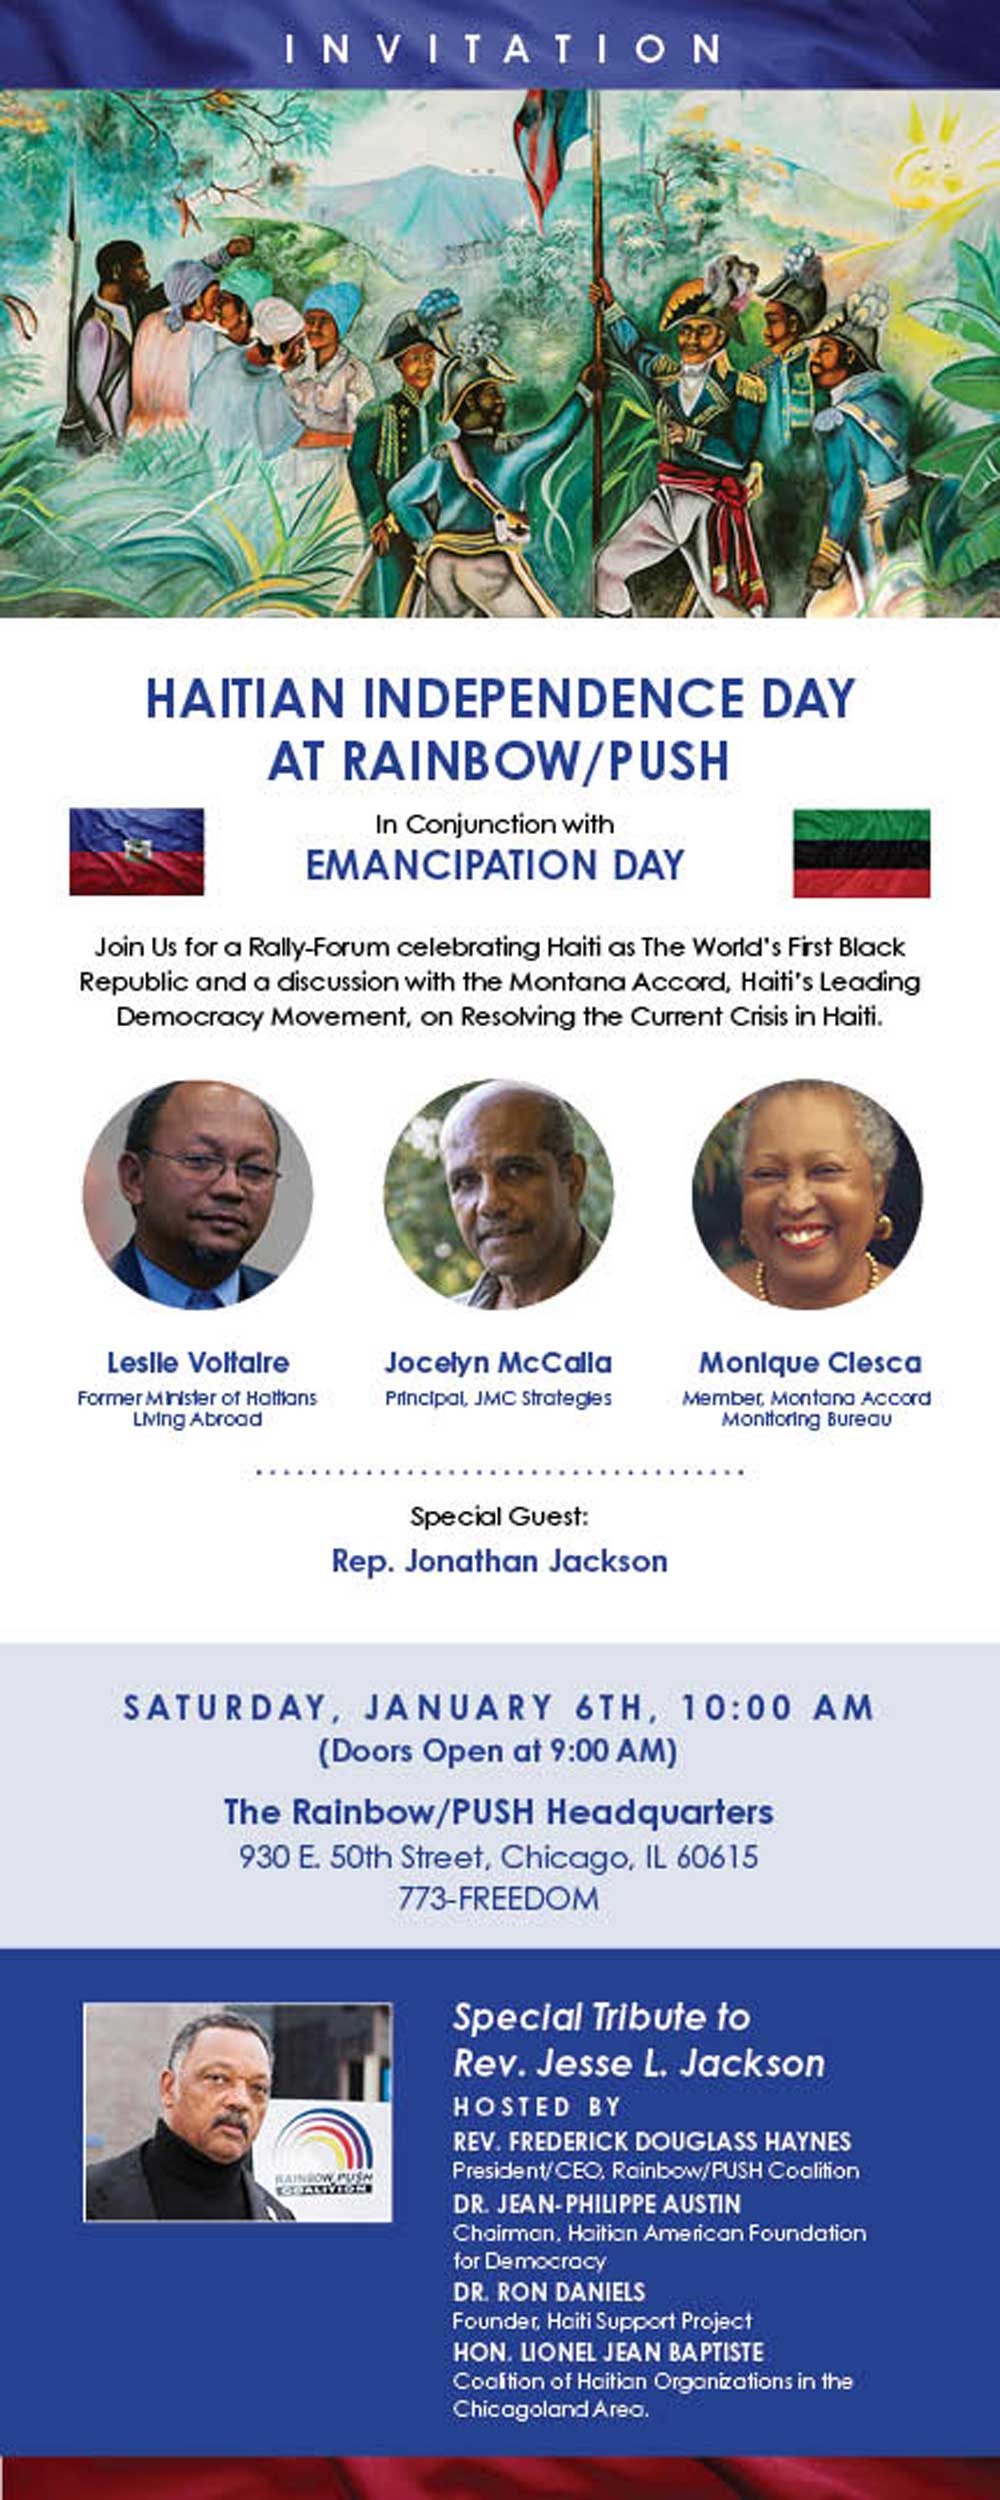 Haitian Independence Day at Rainbow/PUSH